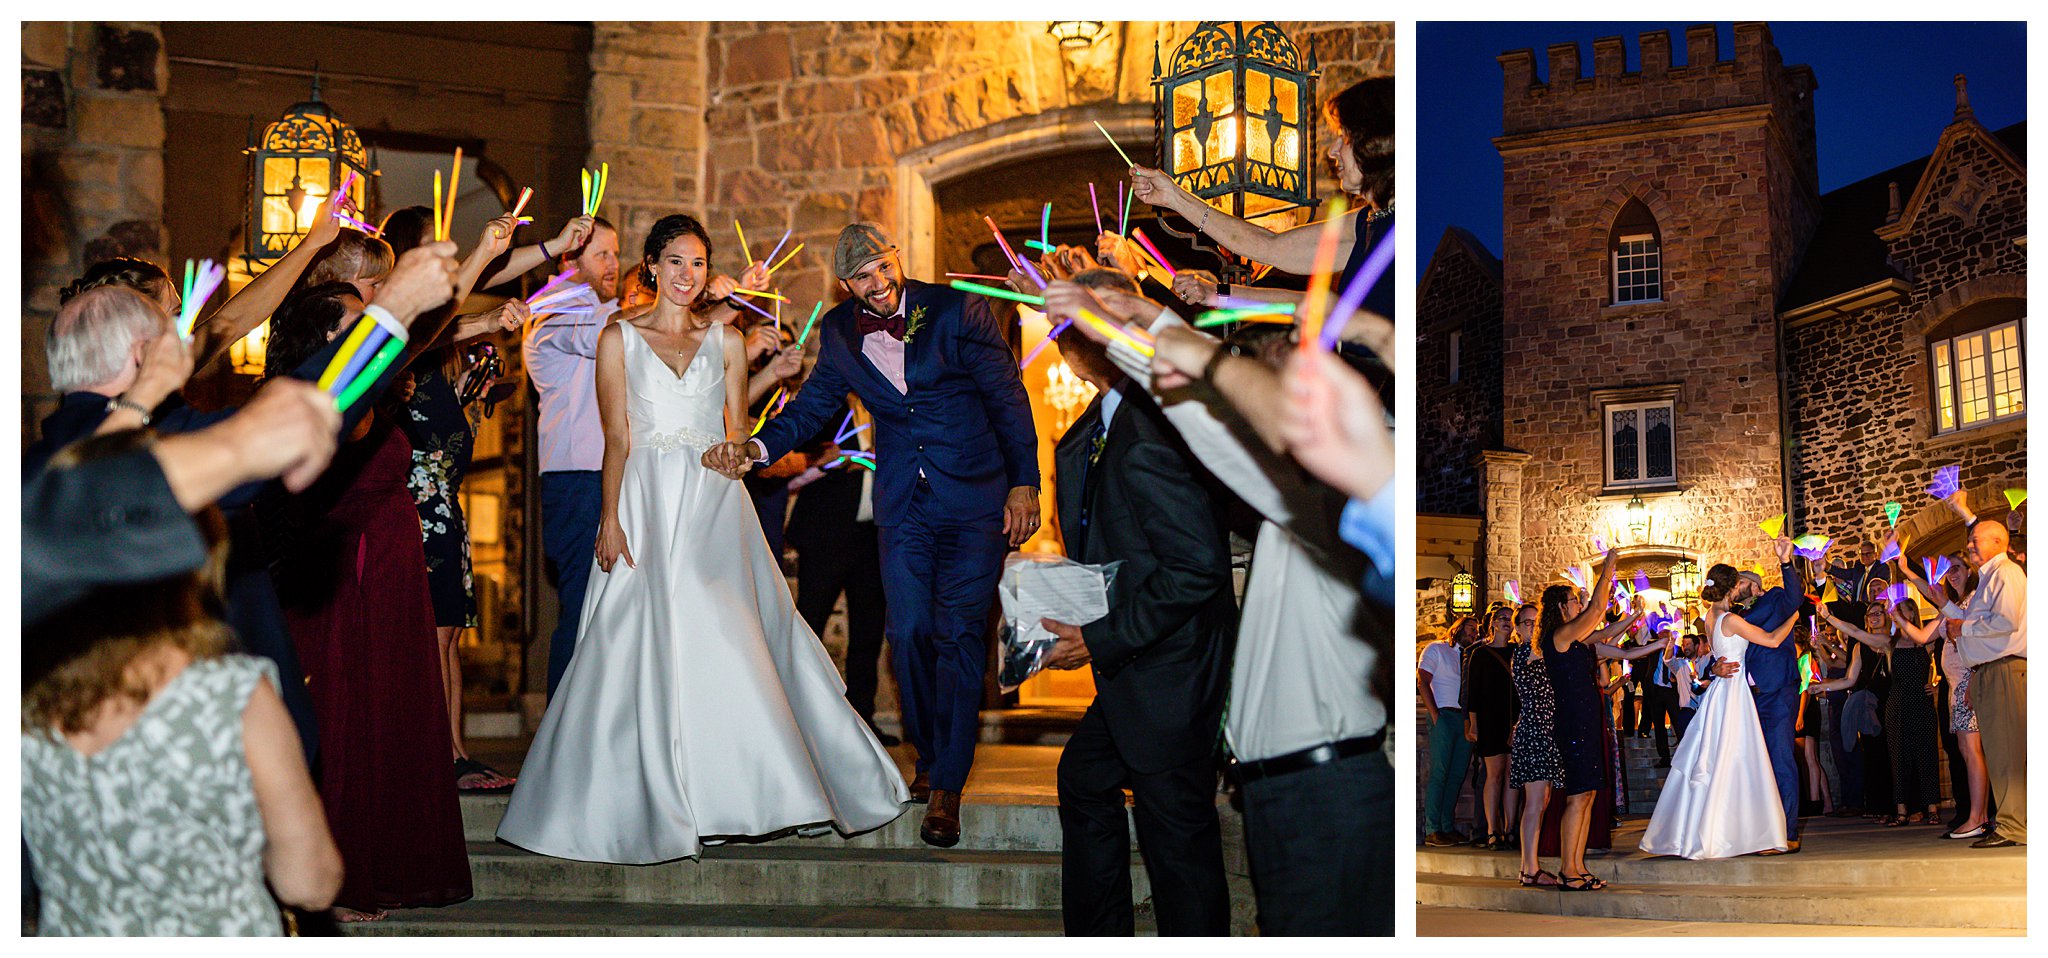 A couple leaves their wedding with their guests waving bright glowsticks